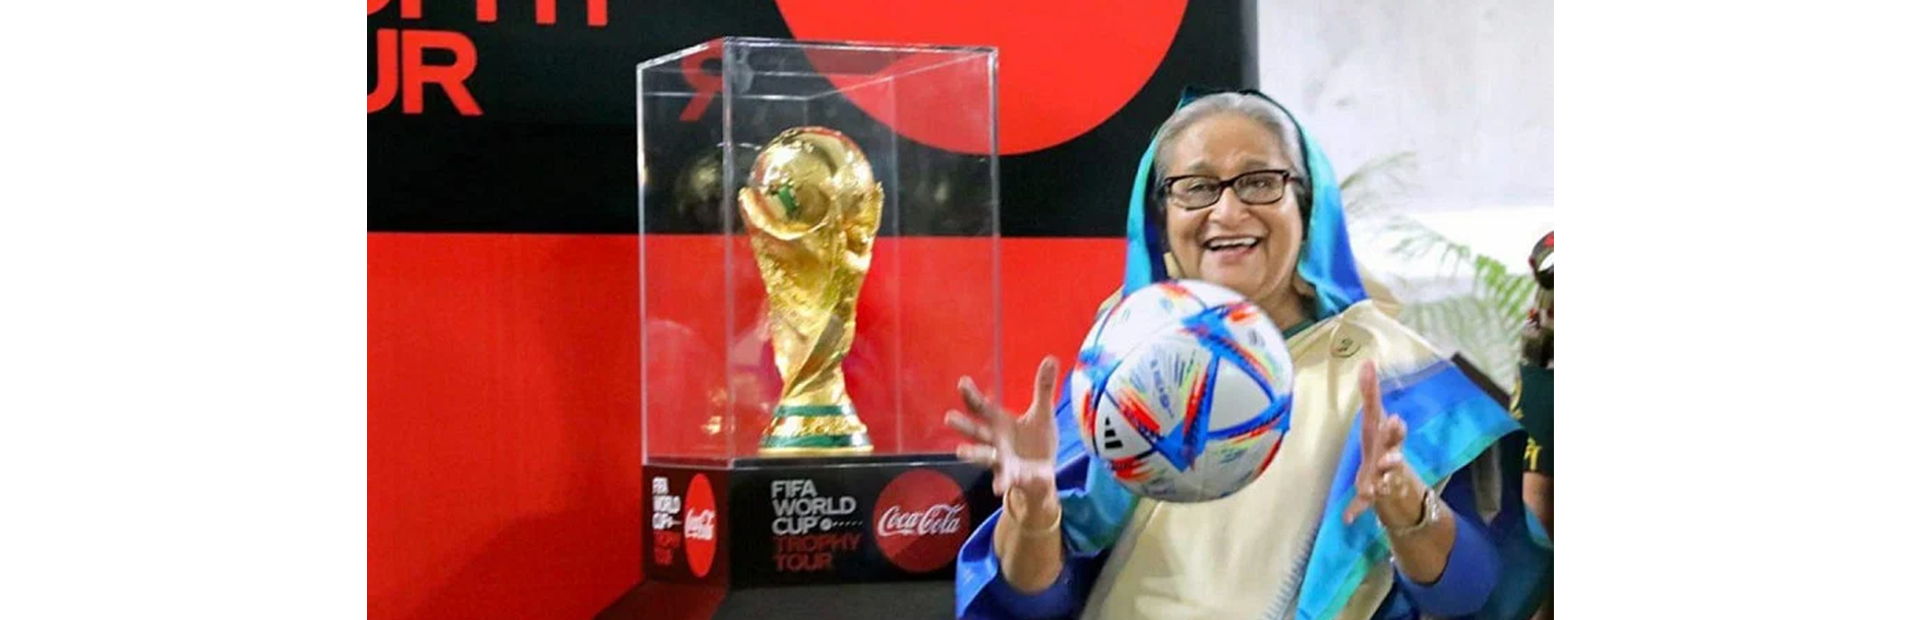 PM hopes arrival of FIFA World Cup trophy will inspire youth